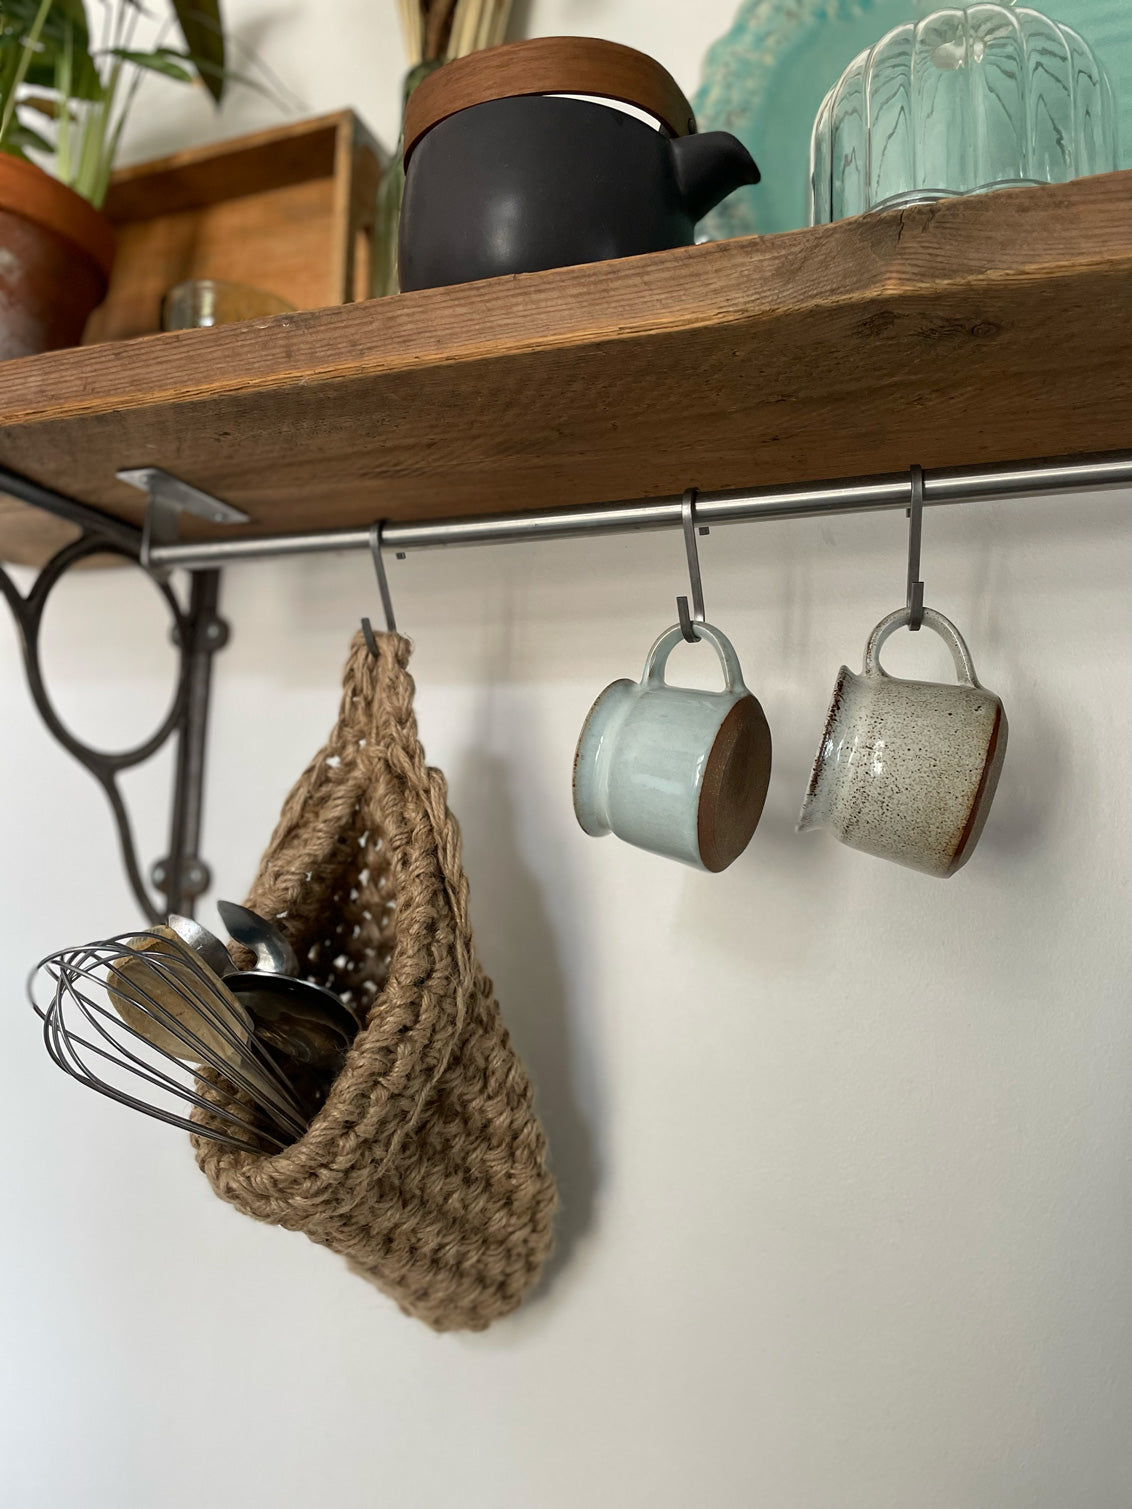 Image showing kitchen shelf with hanging storage bag suspended by a metal hook with handmade storage bag containing kitchen utensils, Jute hanging storage bag holing with whisk and ladle, handmade sustainable crochet decor, rustic natural organic homeware accessories, brown strong jute storage solution, kitchen bathroom bedroom hanging storage bag